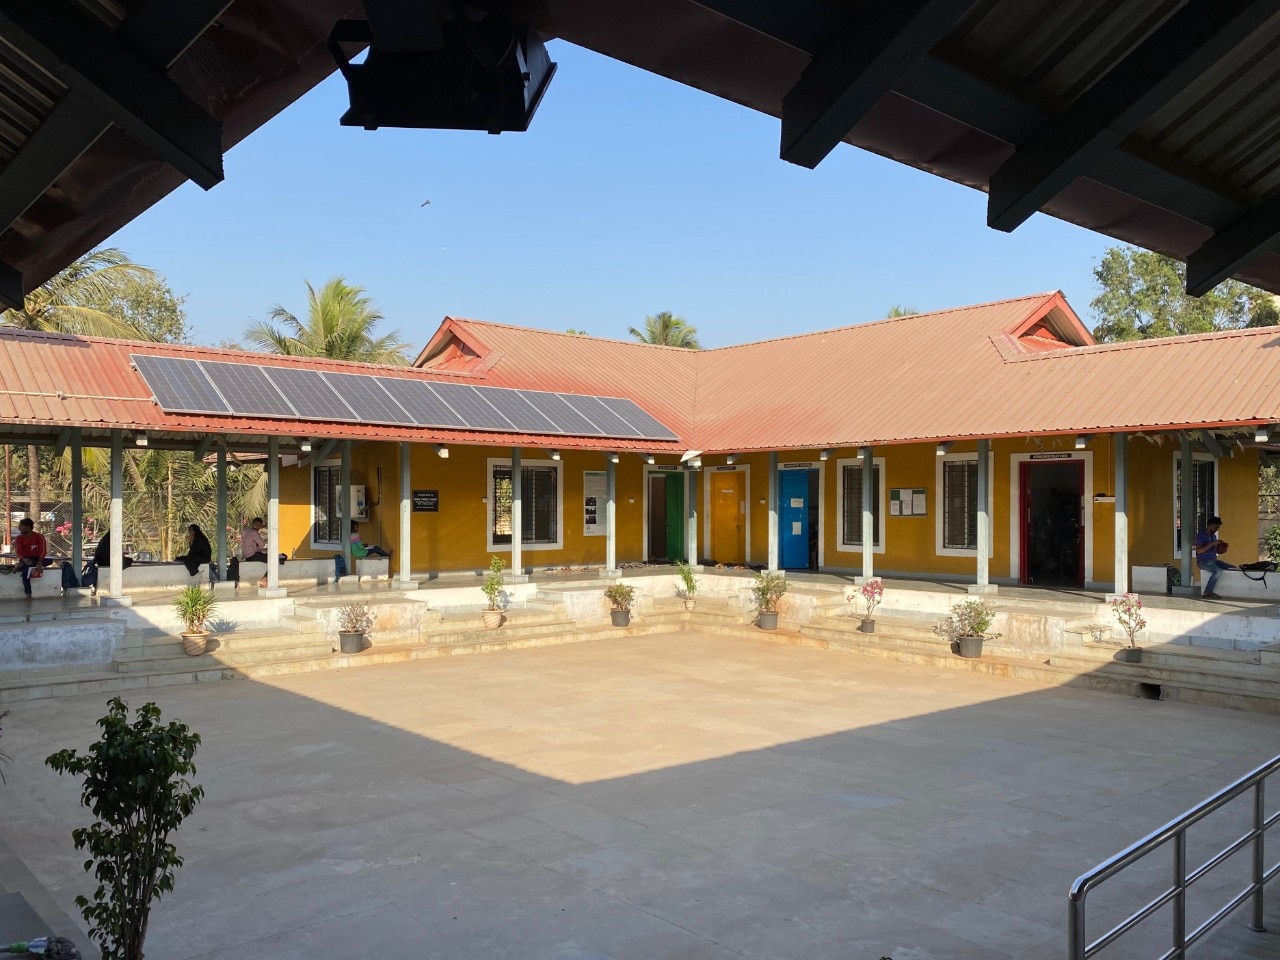 Image of learning facilities operated by TISS in M-East Ward as part of social outreach program.